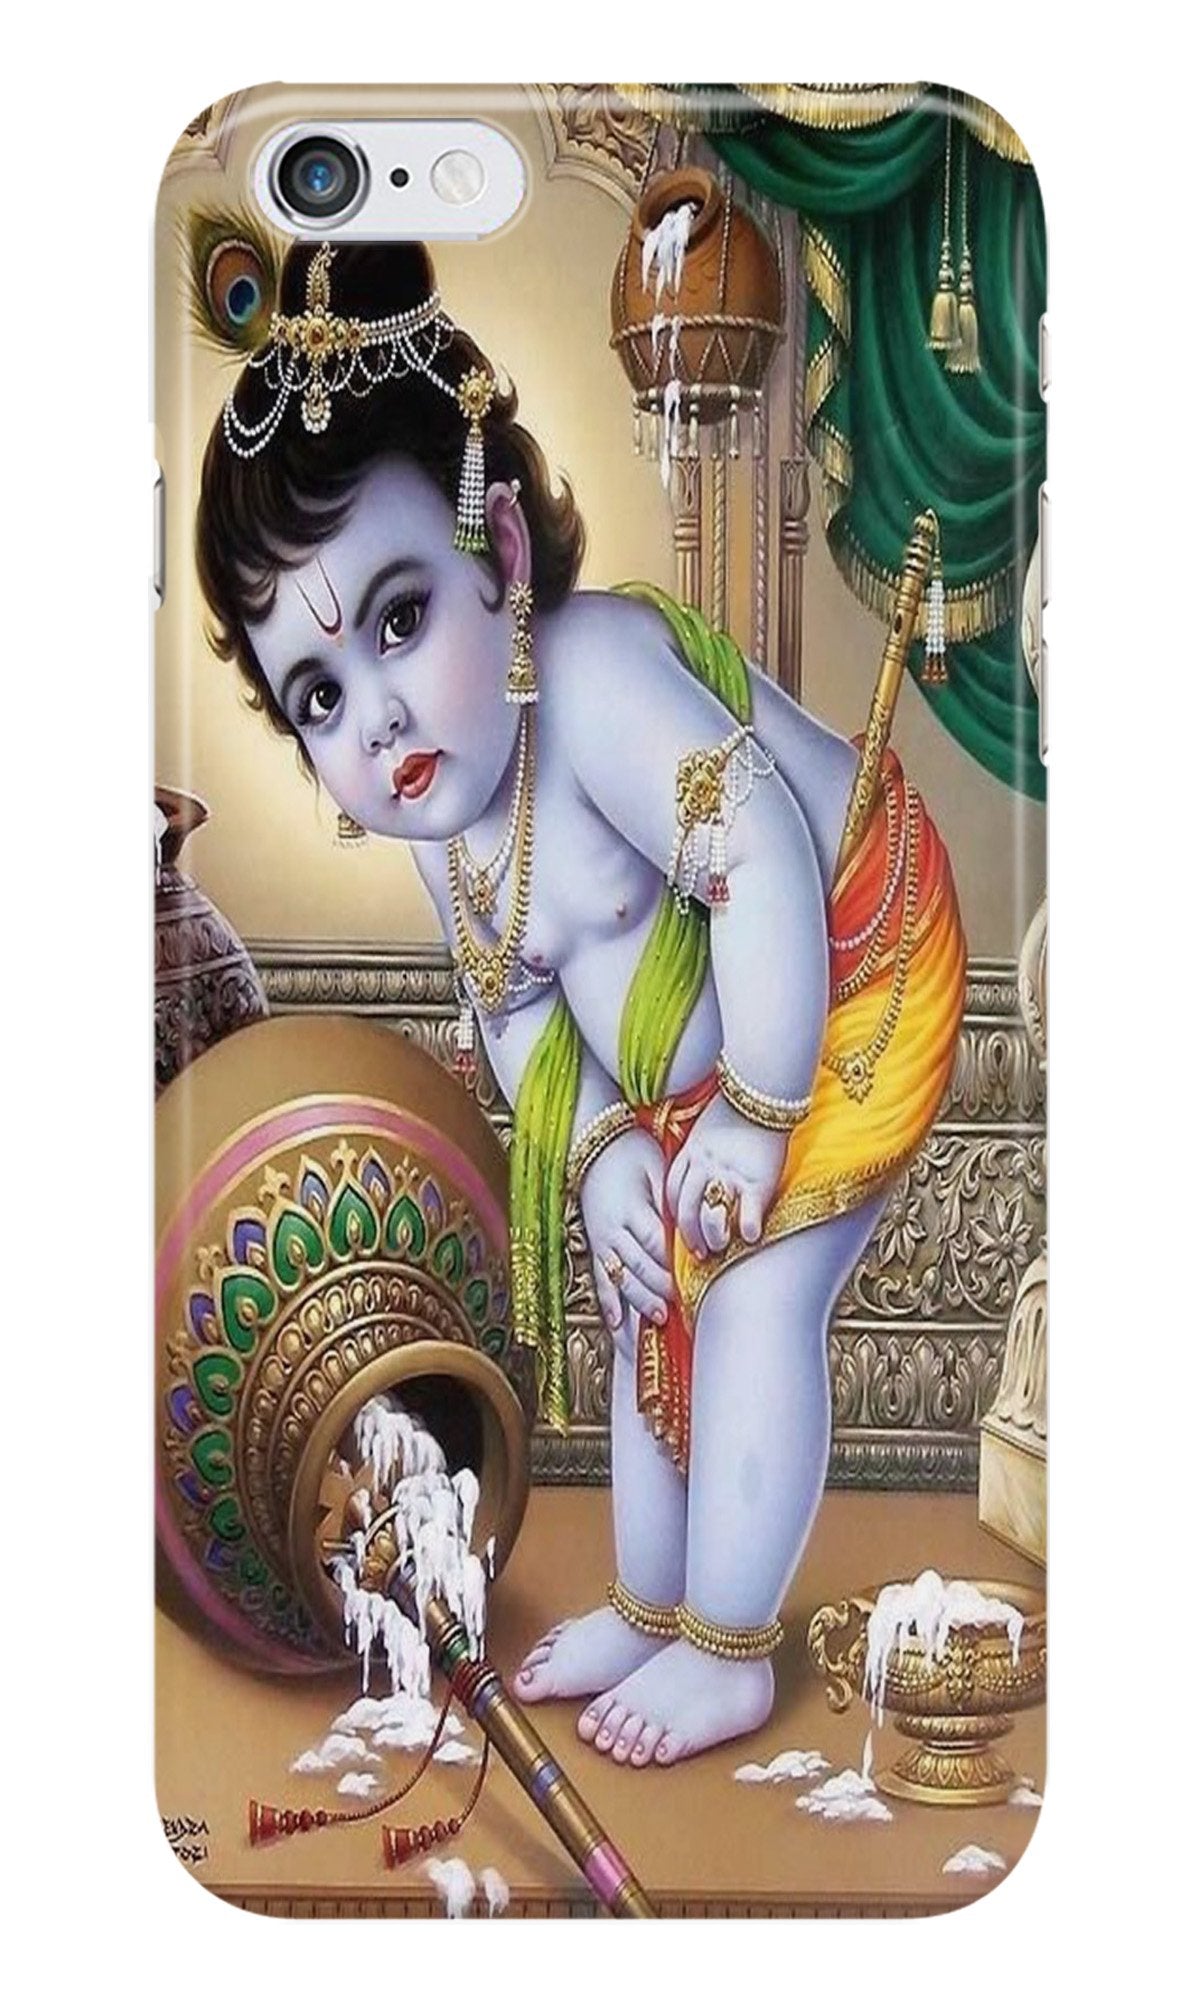 Bal Gopal2 Case for iPhone 6 Plus/ 6s Plus